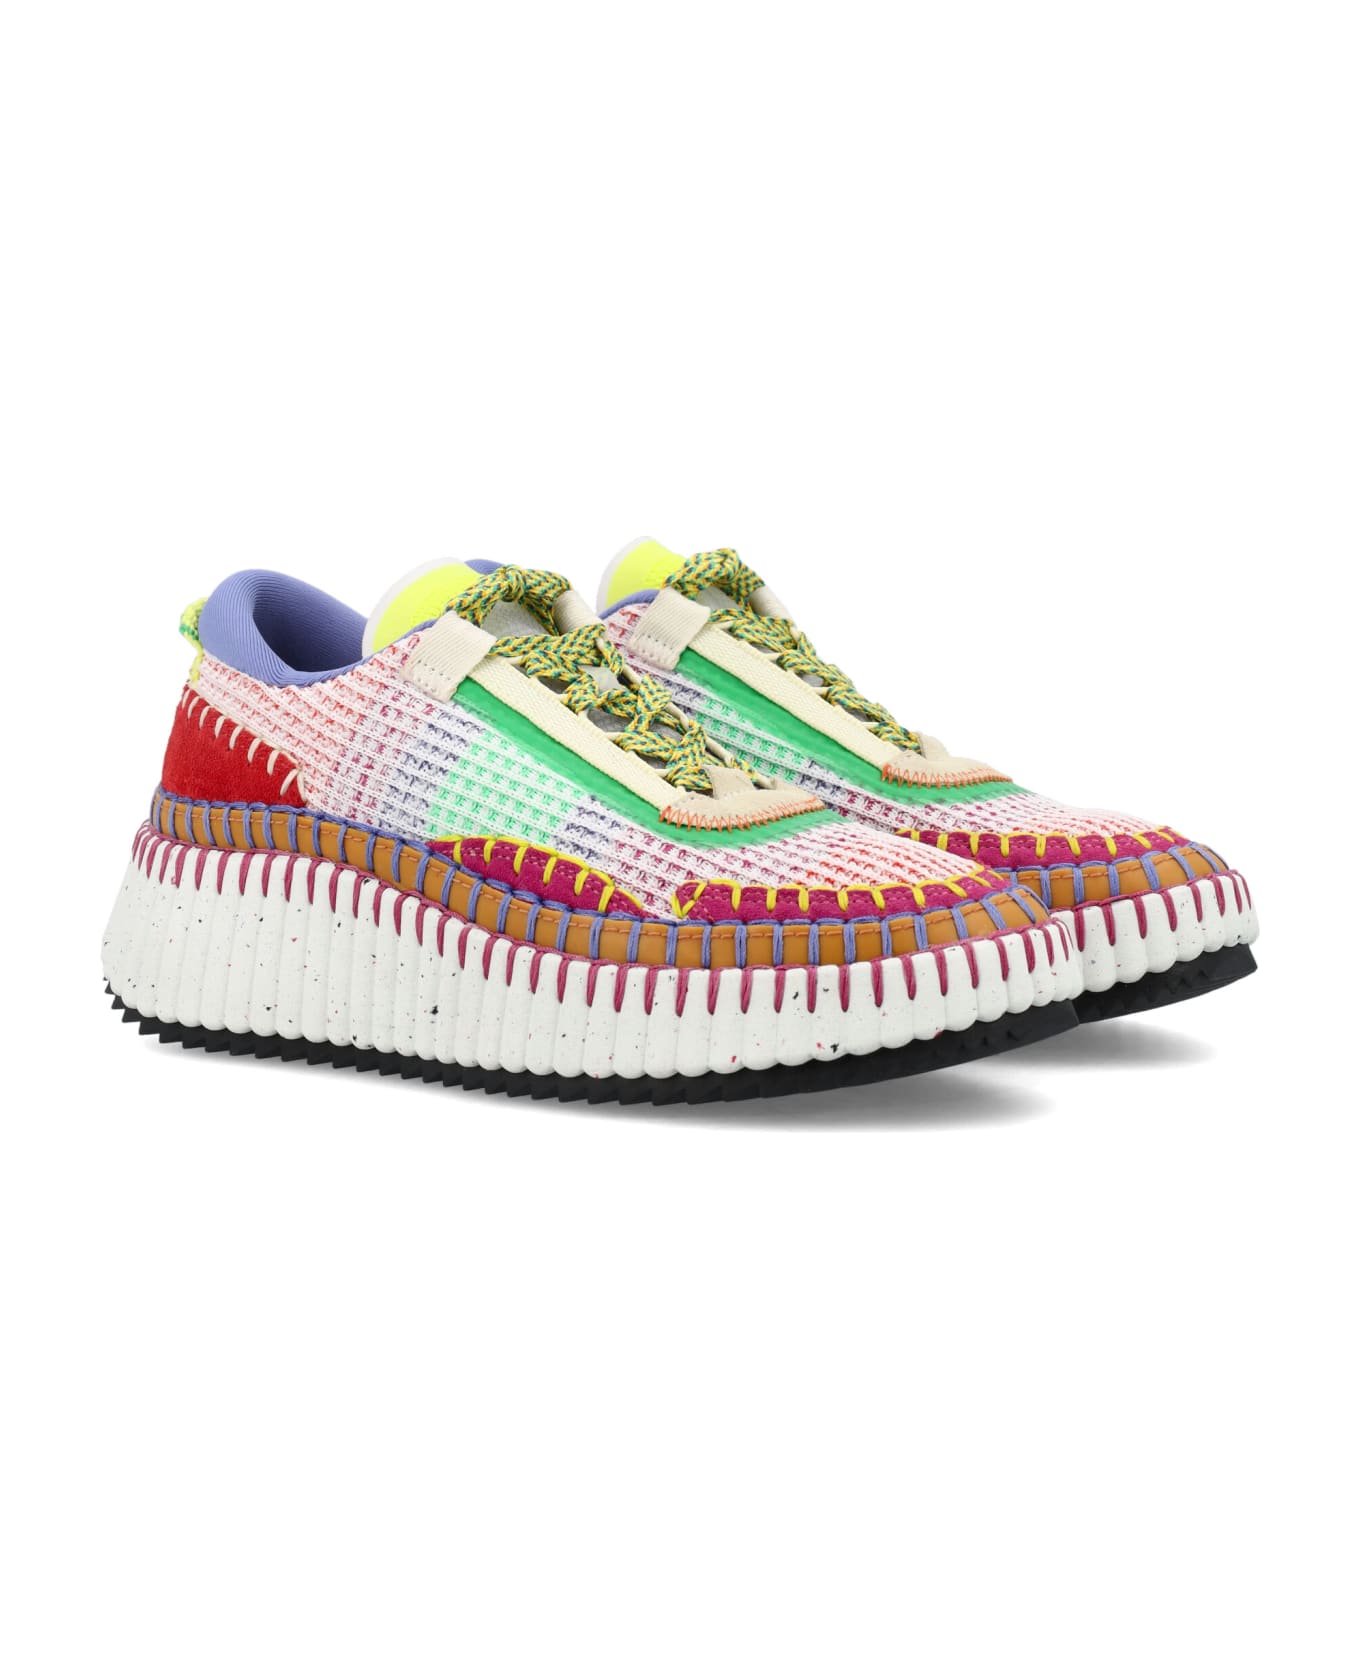 Chloé Nama Woman Sneakers - RED MULTICOLOR